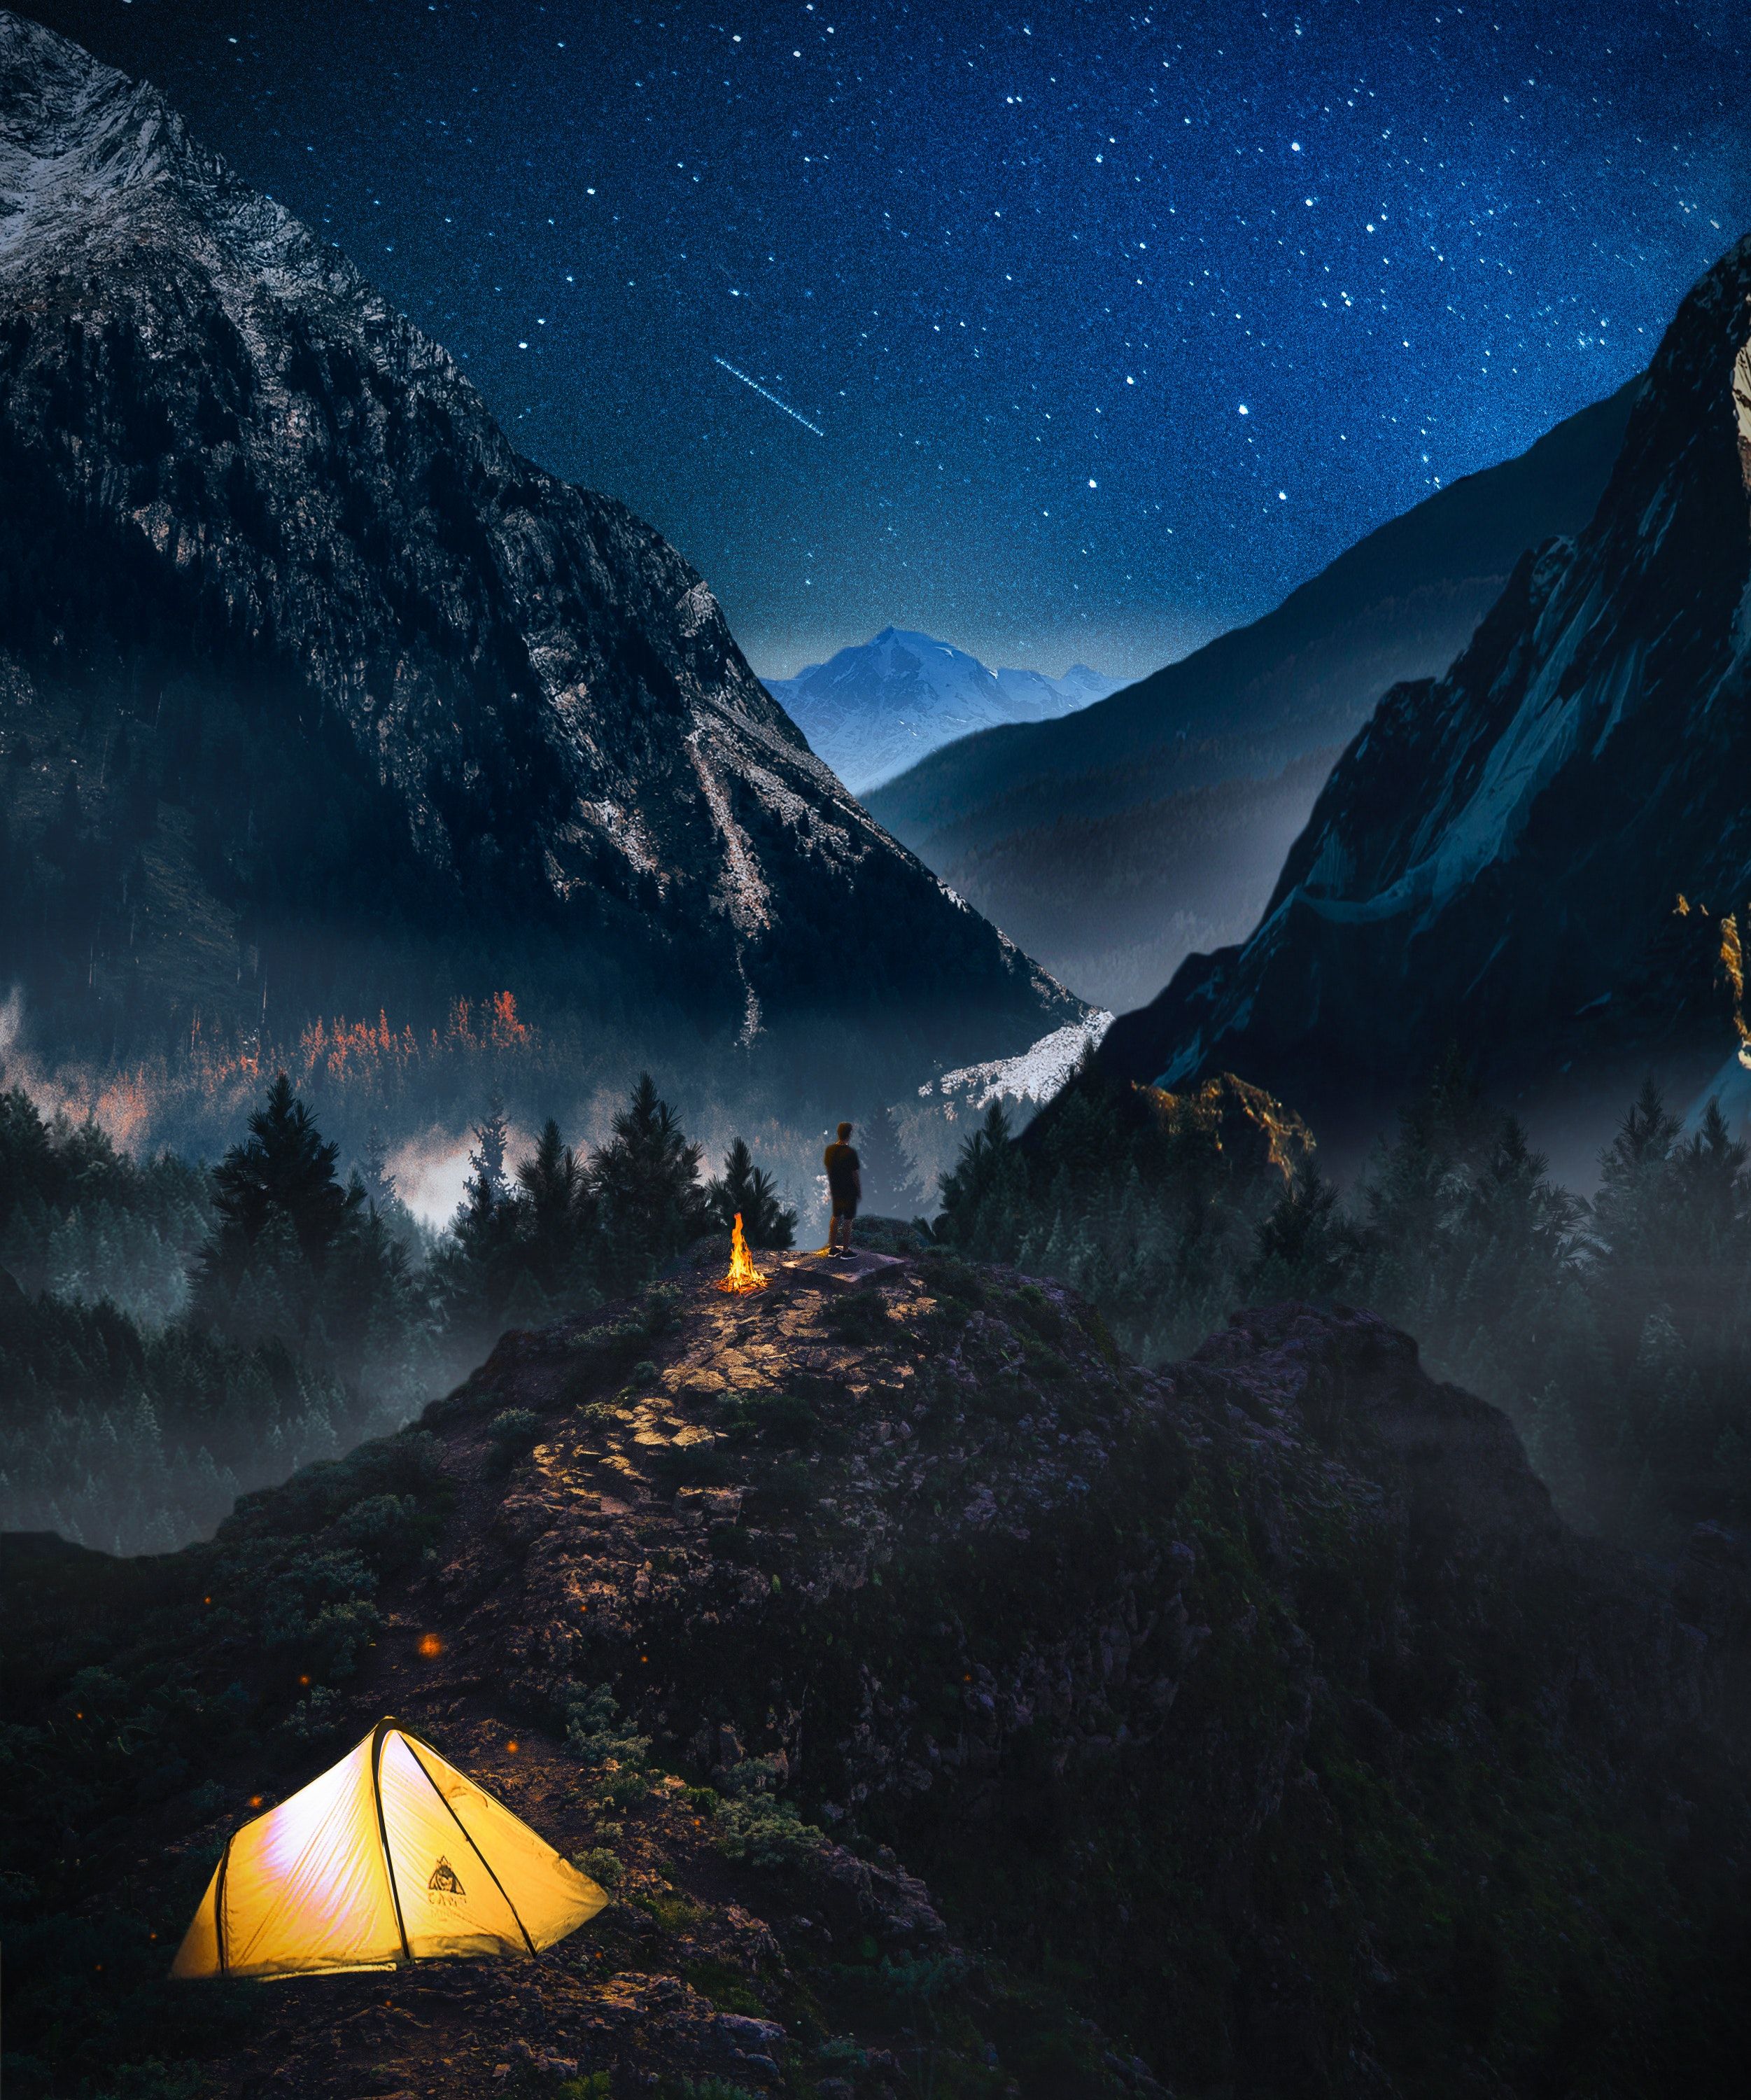 Mobile wallpaper: Camping, Starry Sky, Campsite, Loneliness, Photohop, Nature, Mountains, 111038 download the picture for free